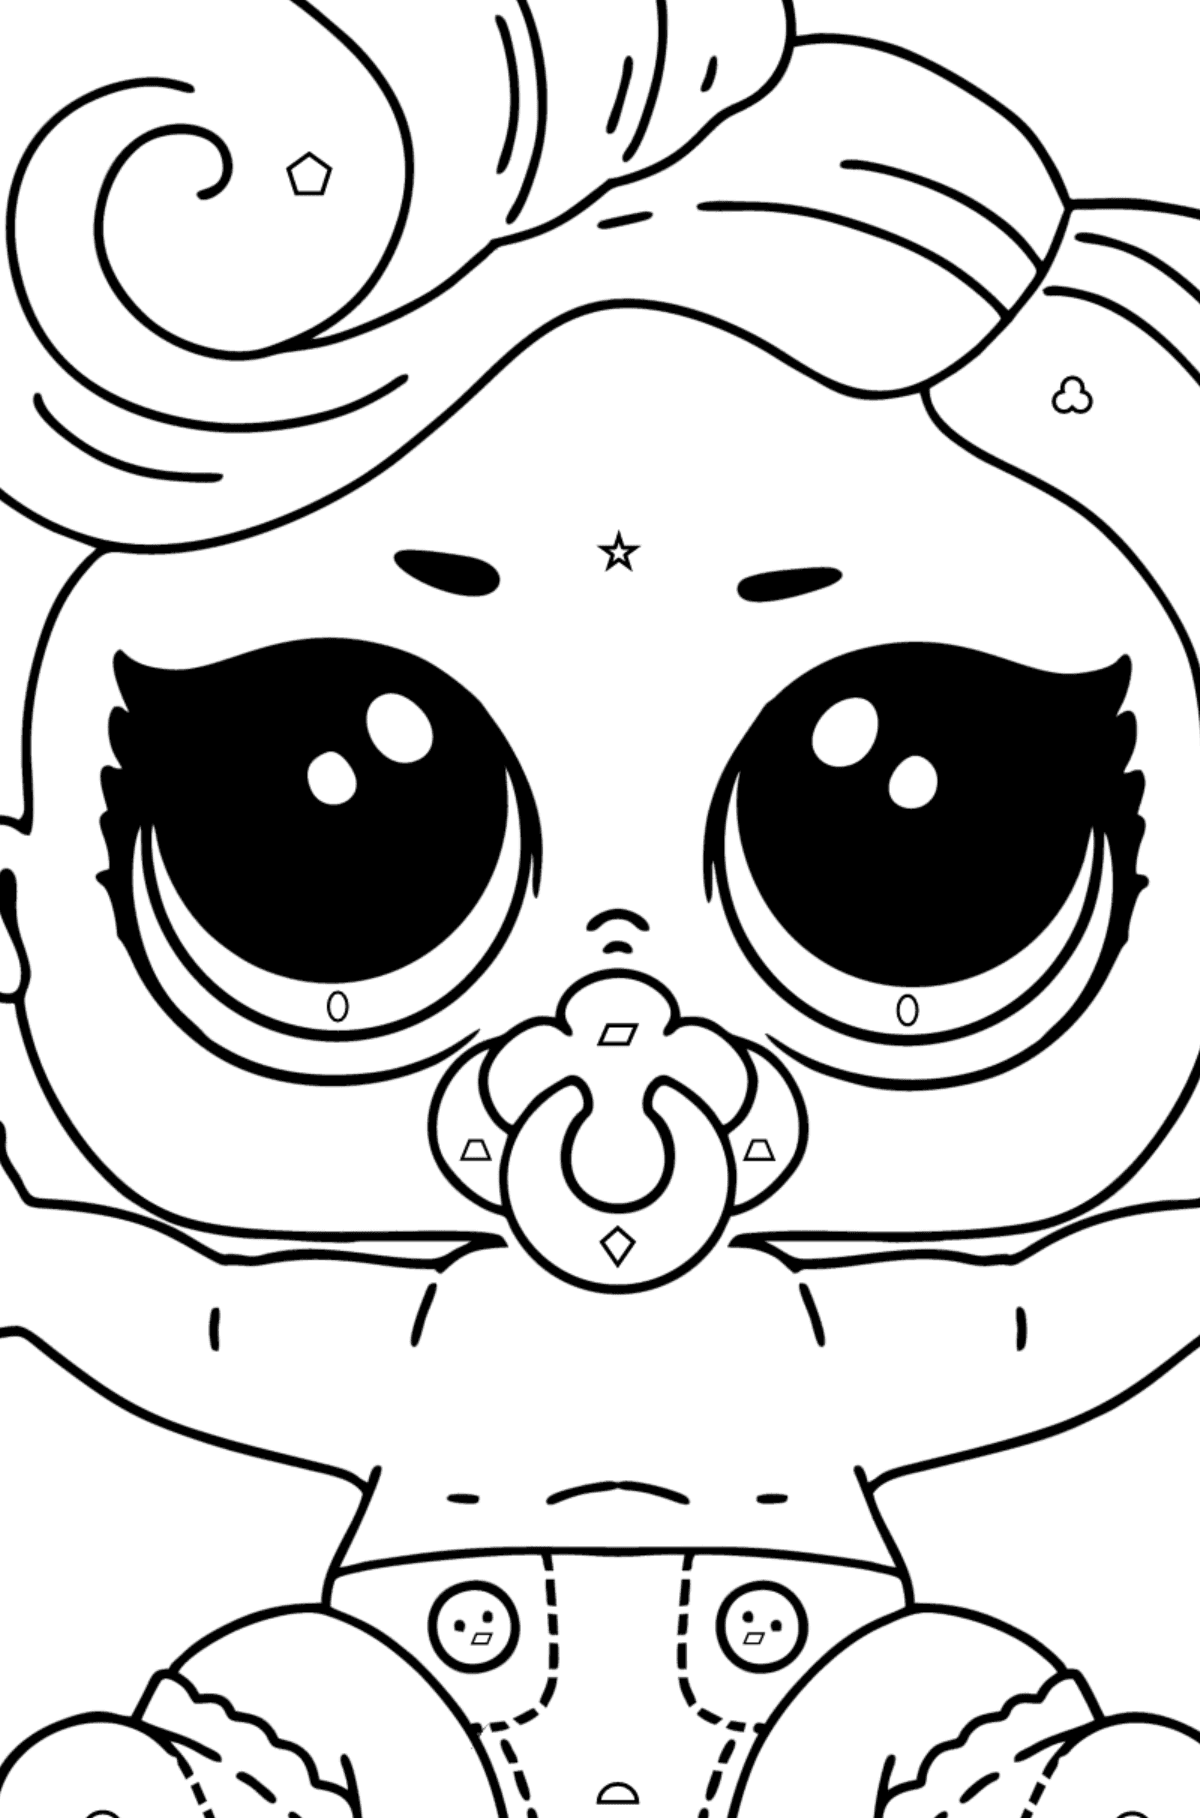 Coloring page LOL LIL Lux - Coloring by Geometric Shapes for Kids